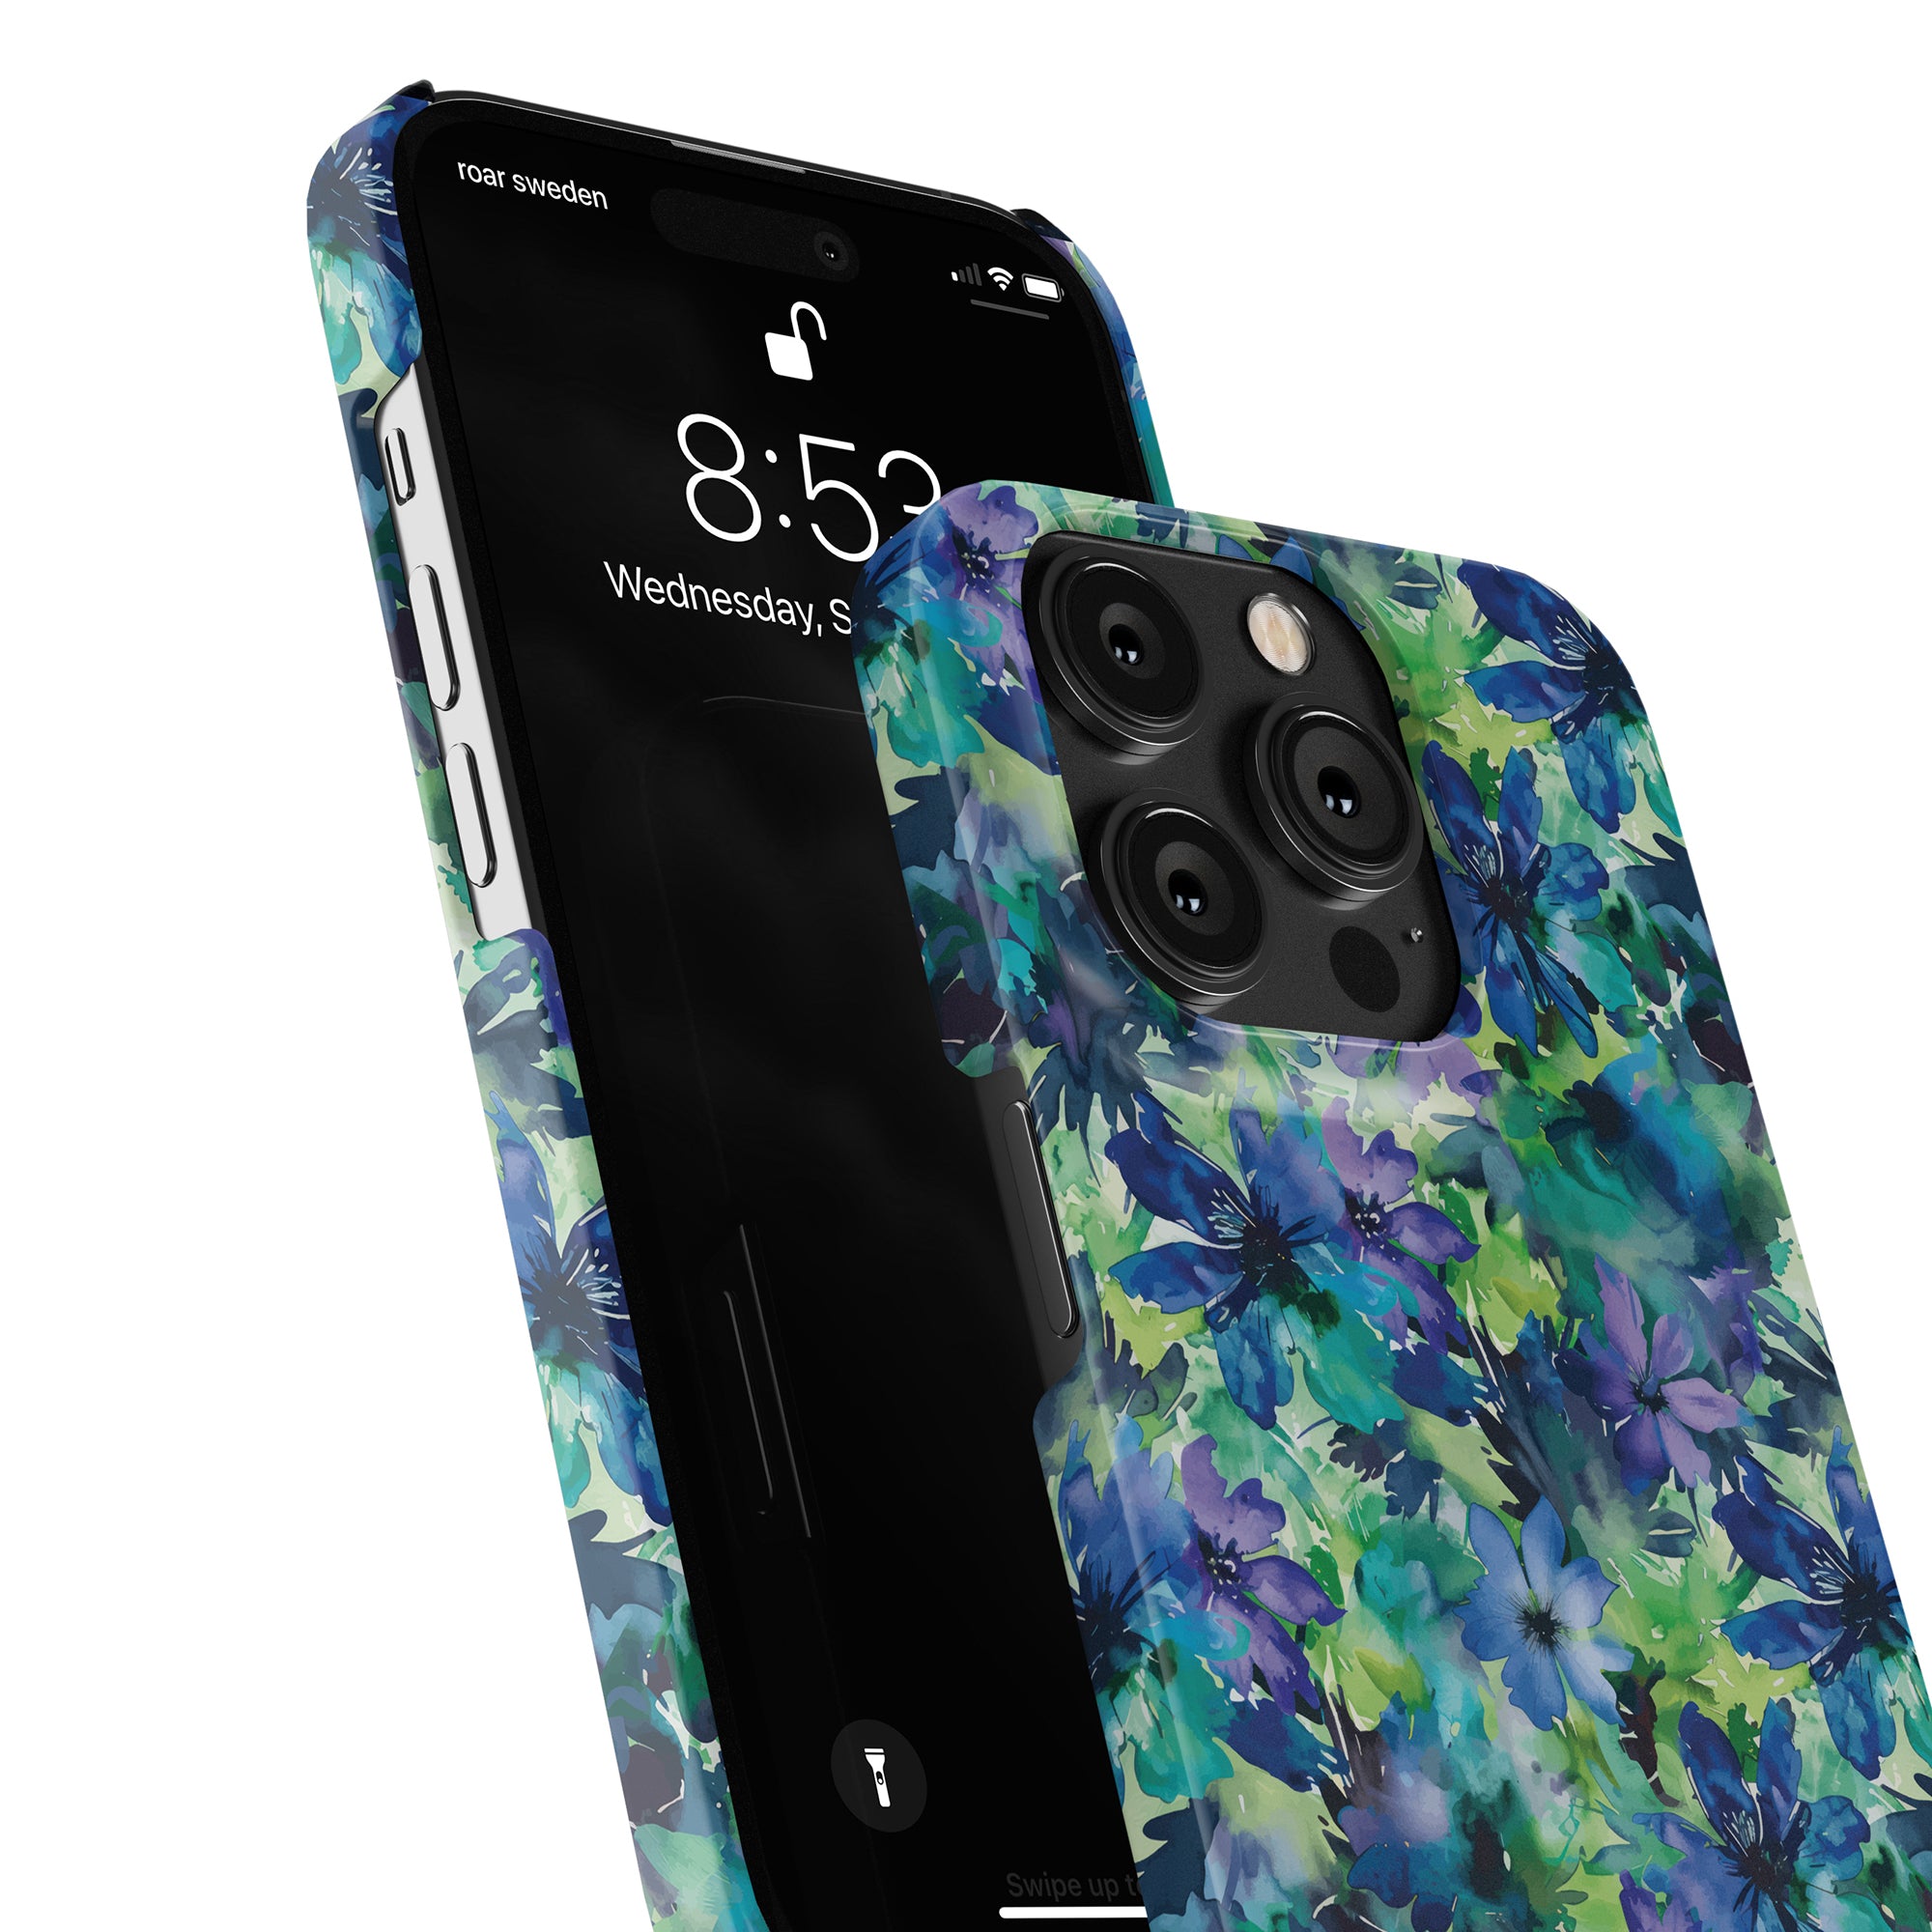 A smartphone with a colorful Sweet Flower - Slim case from the Floral Collection is shown. The screen displays the time as 5:48 on Wednesday, September 19.